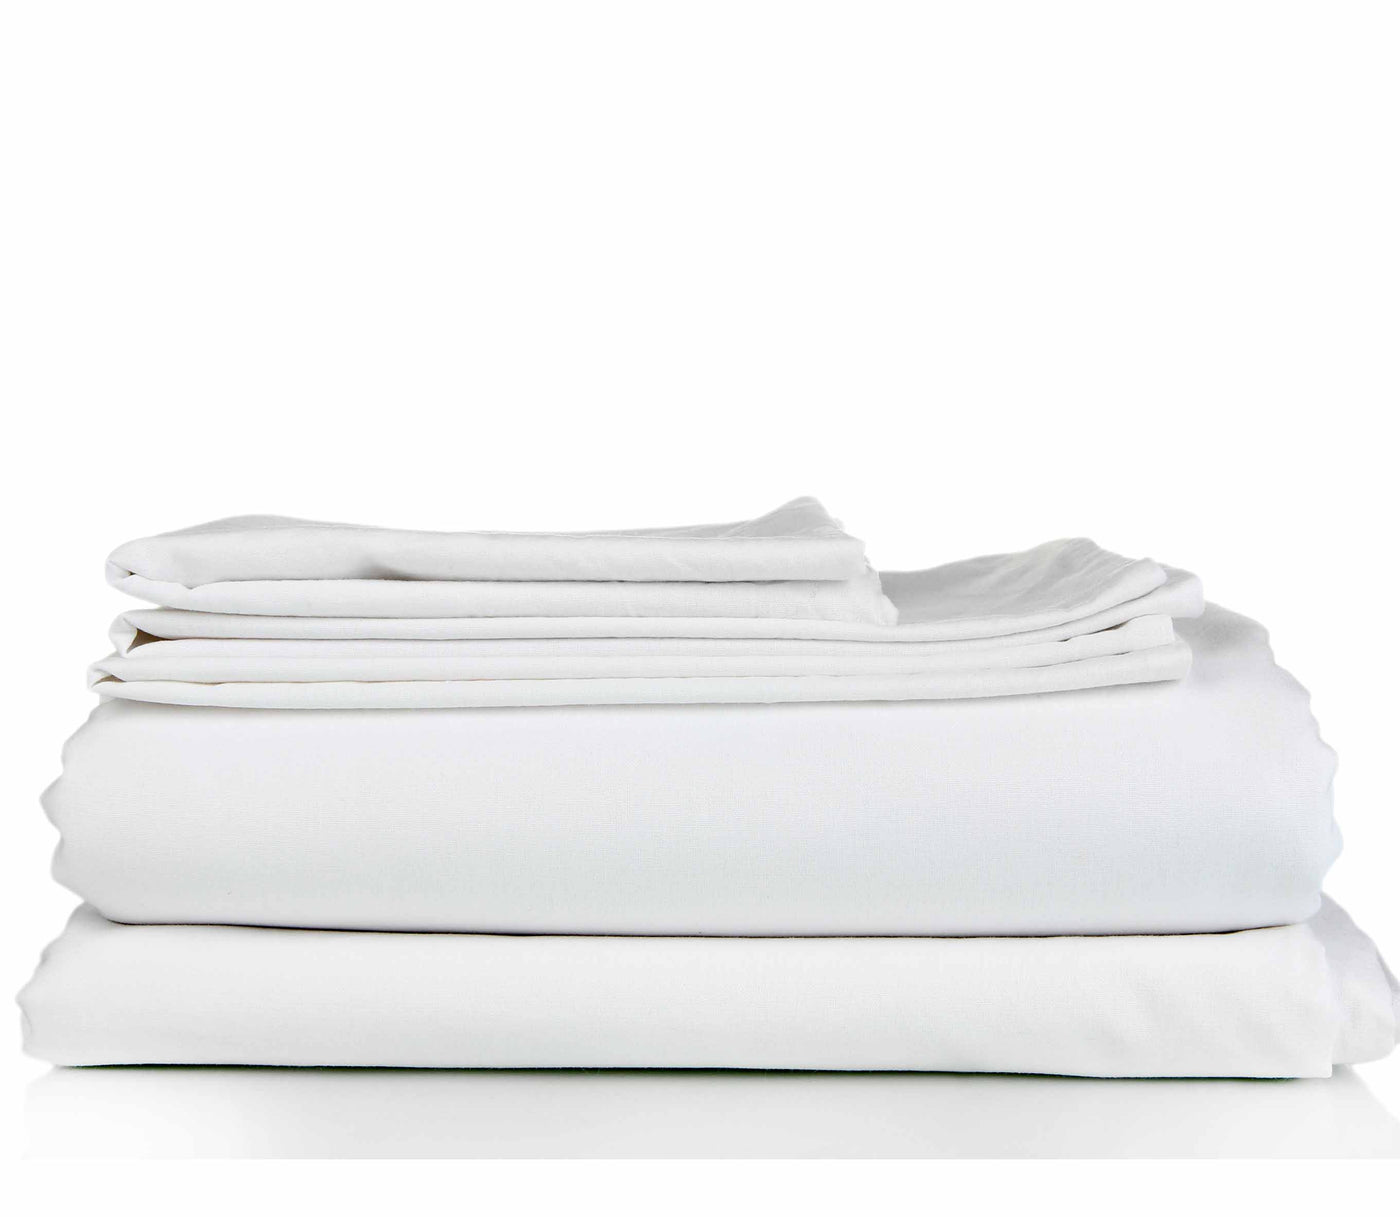 T250 Bed linen Collections white flat sheet, white fitted sheet and white pillowcases